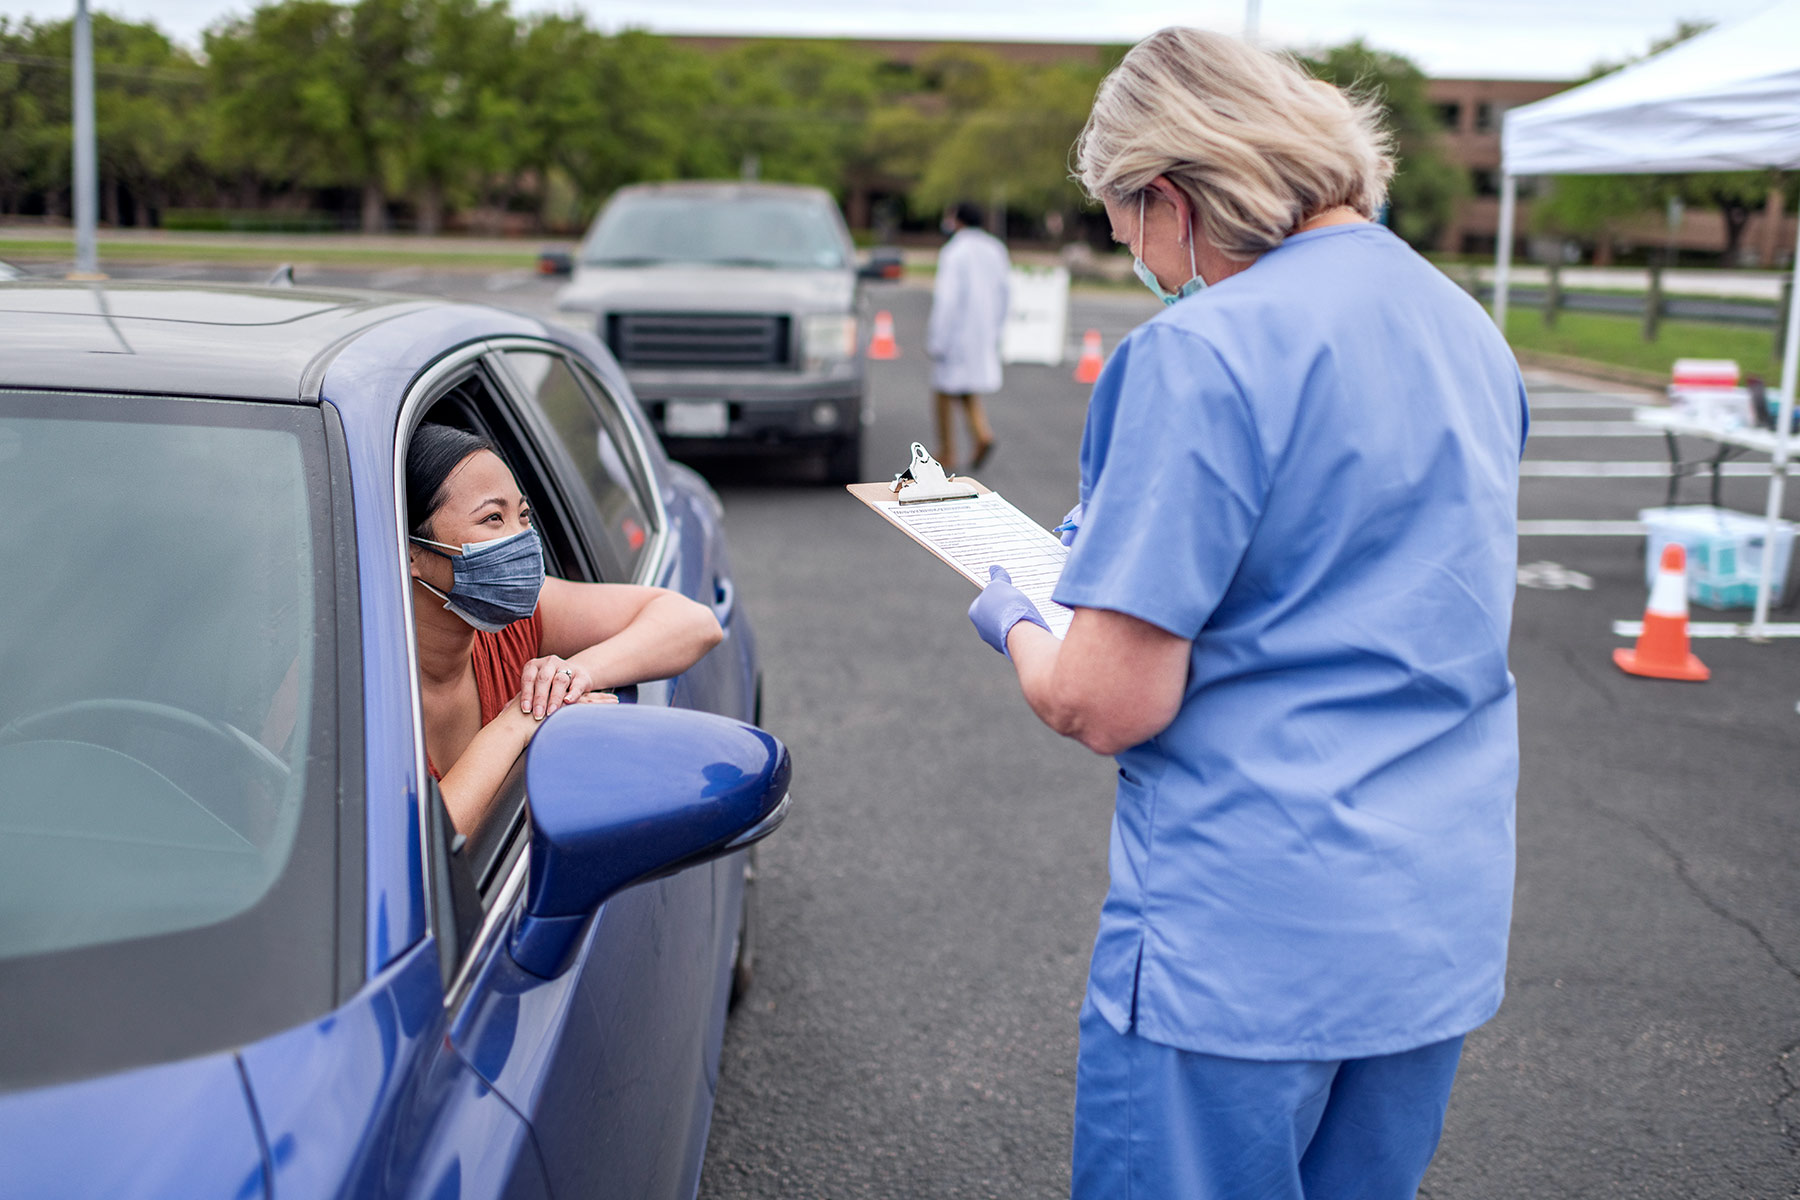 A nurse outside chatting with a patient in her car